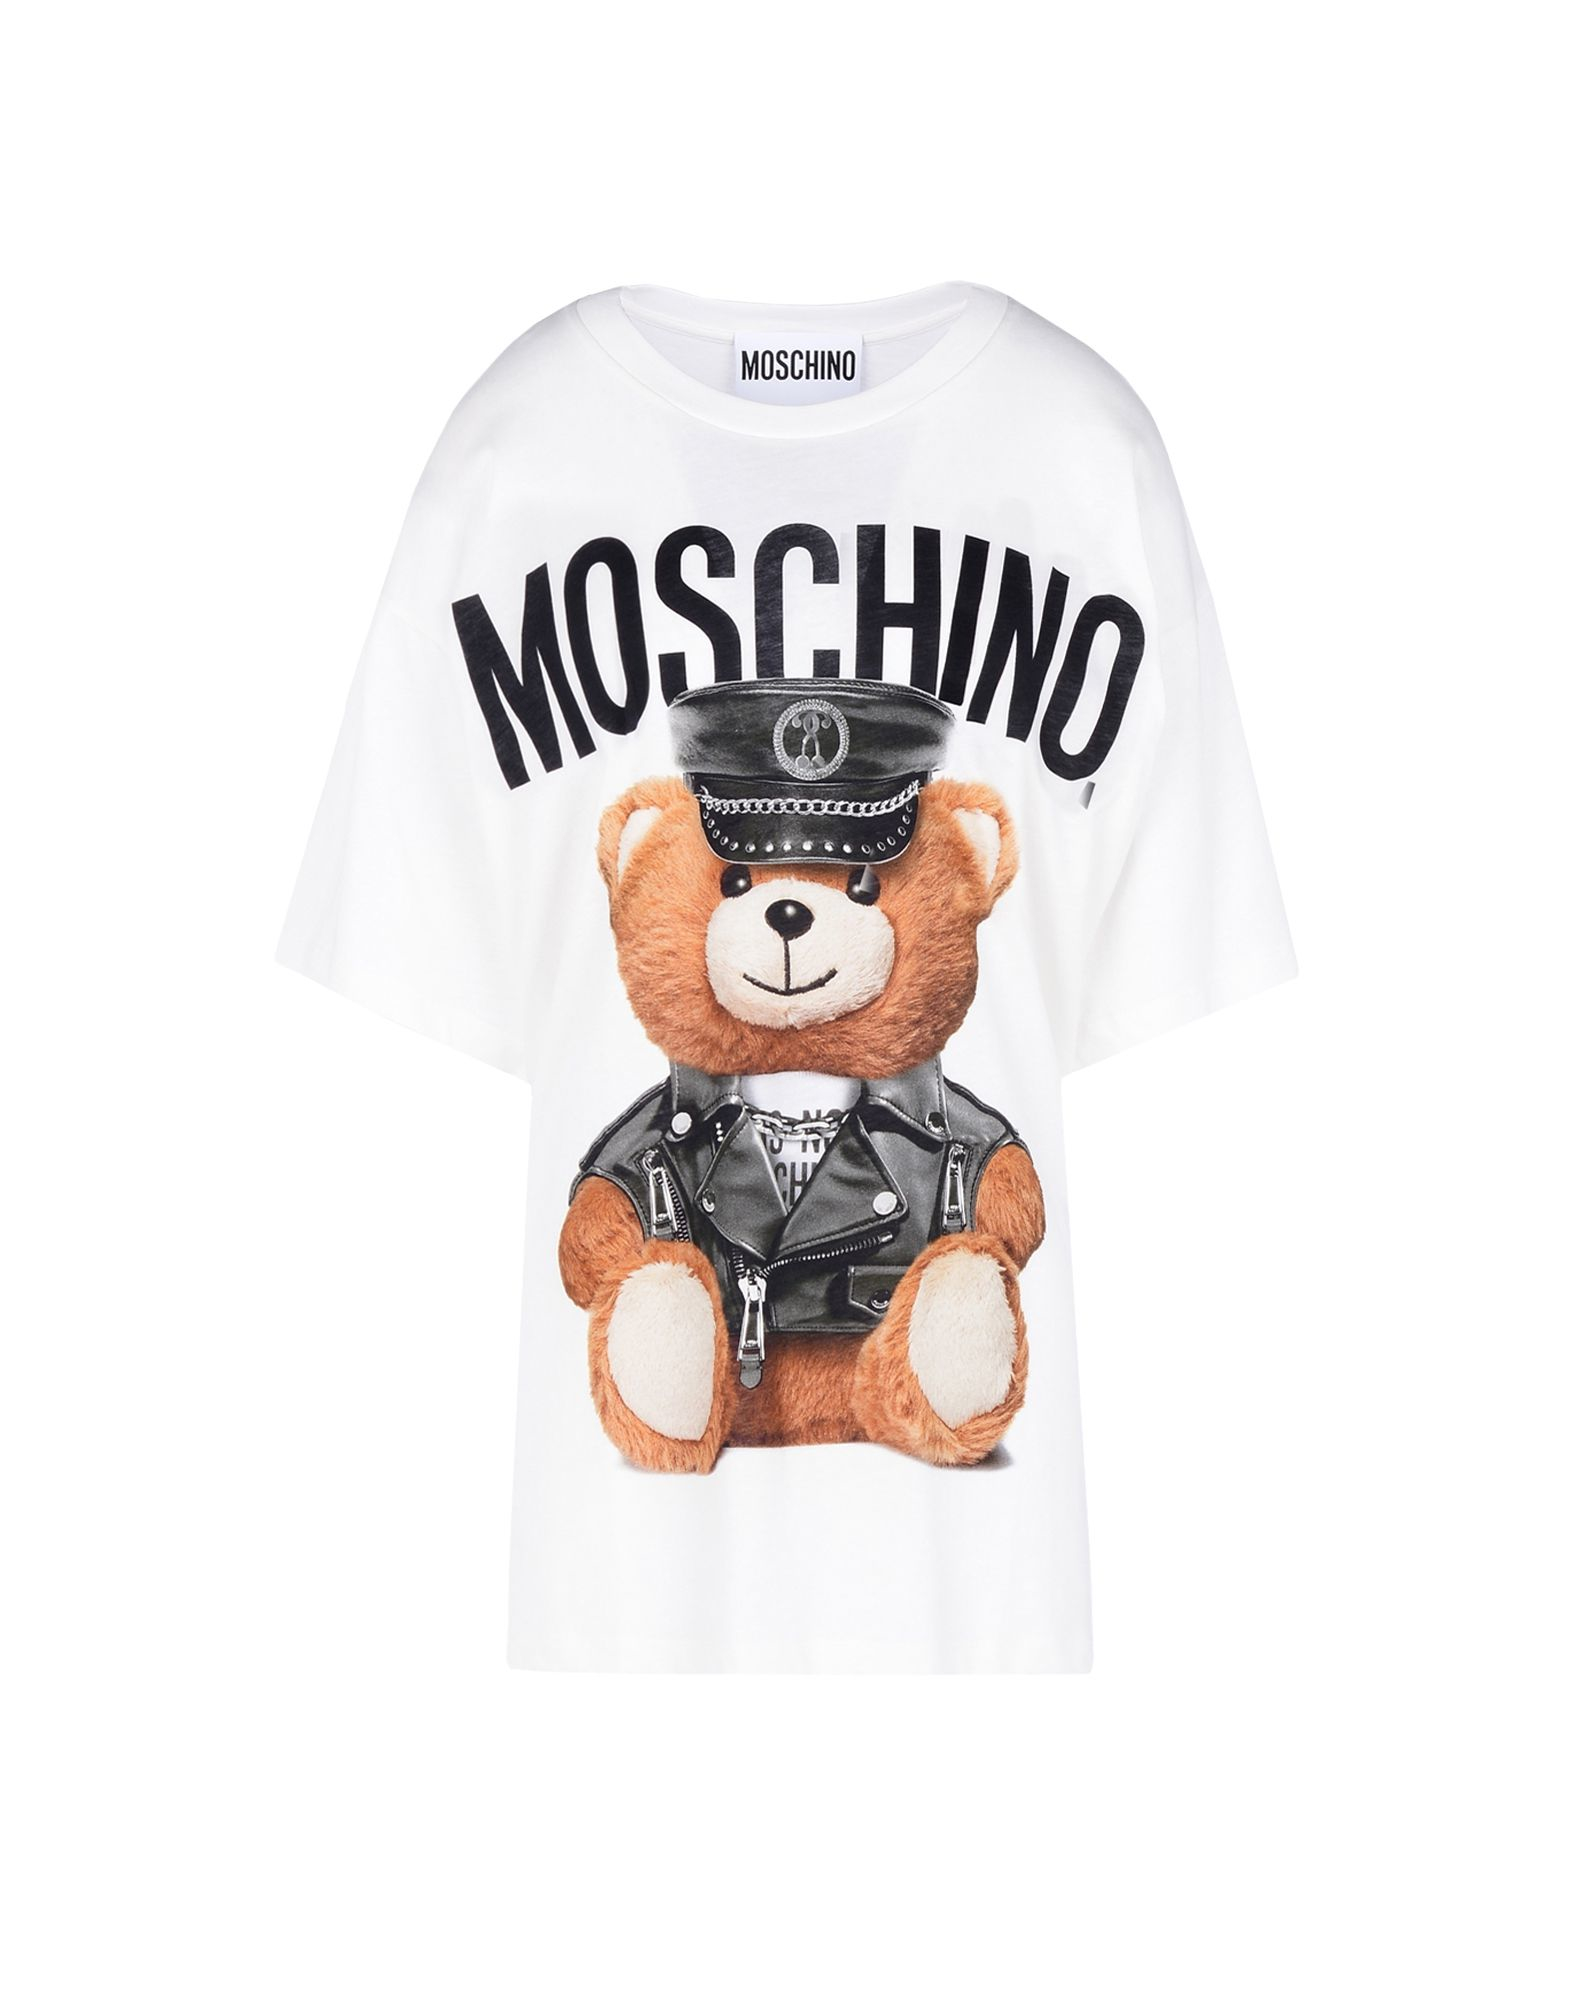 Moschino Cotton Short Sleeve T-shirts in Ivory (White) - Lyst